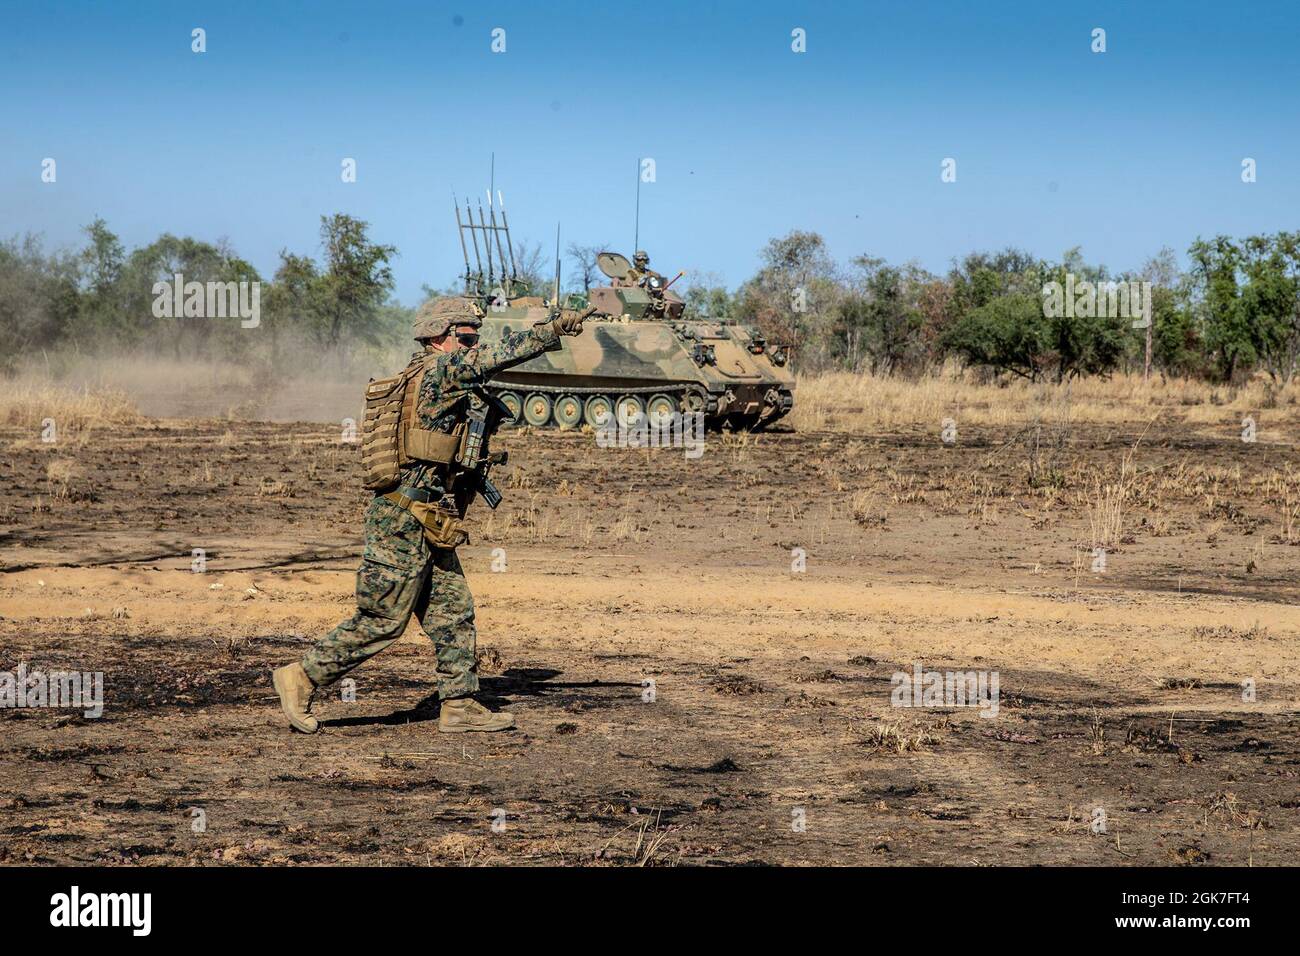 U.S. Marine Corps 1st Lt. Michael Rivera, a platoon commander with Company B., 1st Battalion, 7th Marine Regiment (Reinforced), Marine Rotational Force – Darwin, directs an Australian M113 AS4 Armored Personnel Carrier during a dry-run rehearsal at Bradshaw Field Training Area, NT, Australia, Aug. 25, 2021. The dry-run rehearsals were in preparation for a live-fire event between Marines and the Australian Army for Exercise Koolendong. Exercise Koolendong validates MRF-D’s and the Australian Defence Force’s ability to conduct expeditionary command and control operations, demonstrating the share Stock Photo